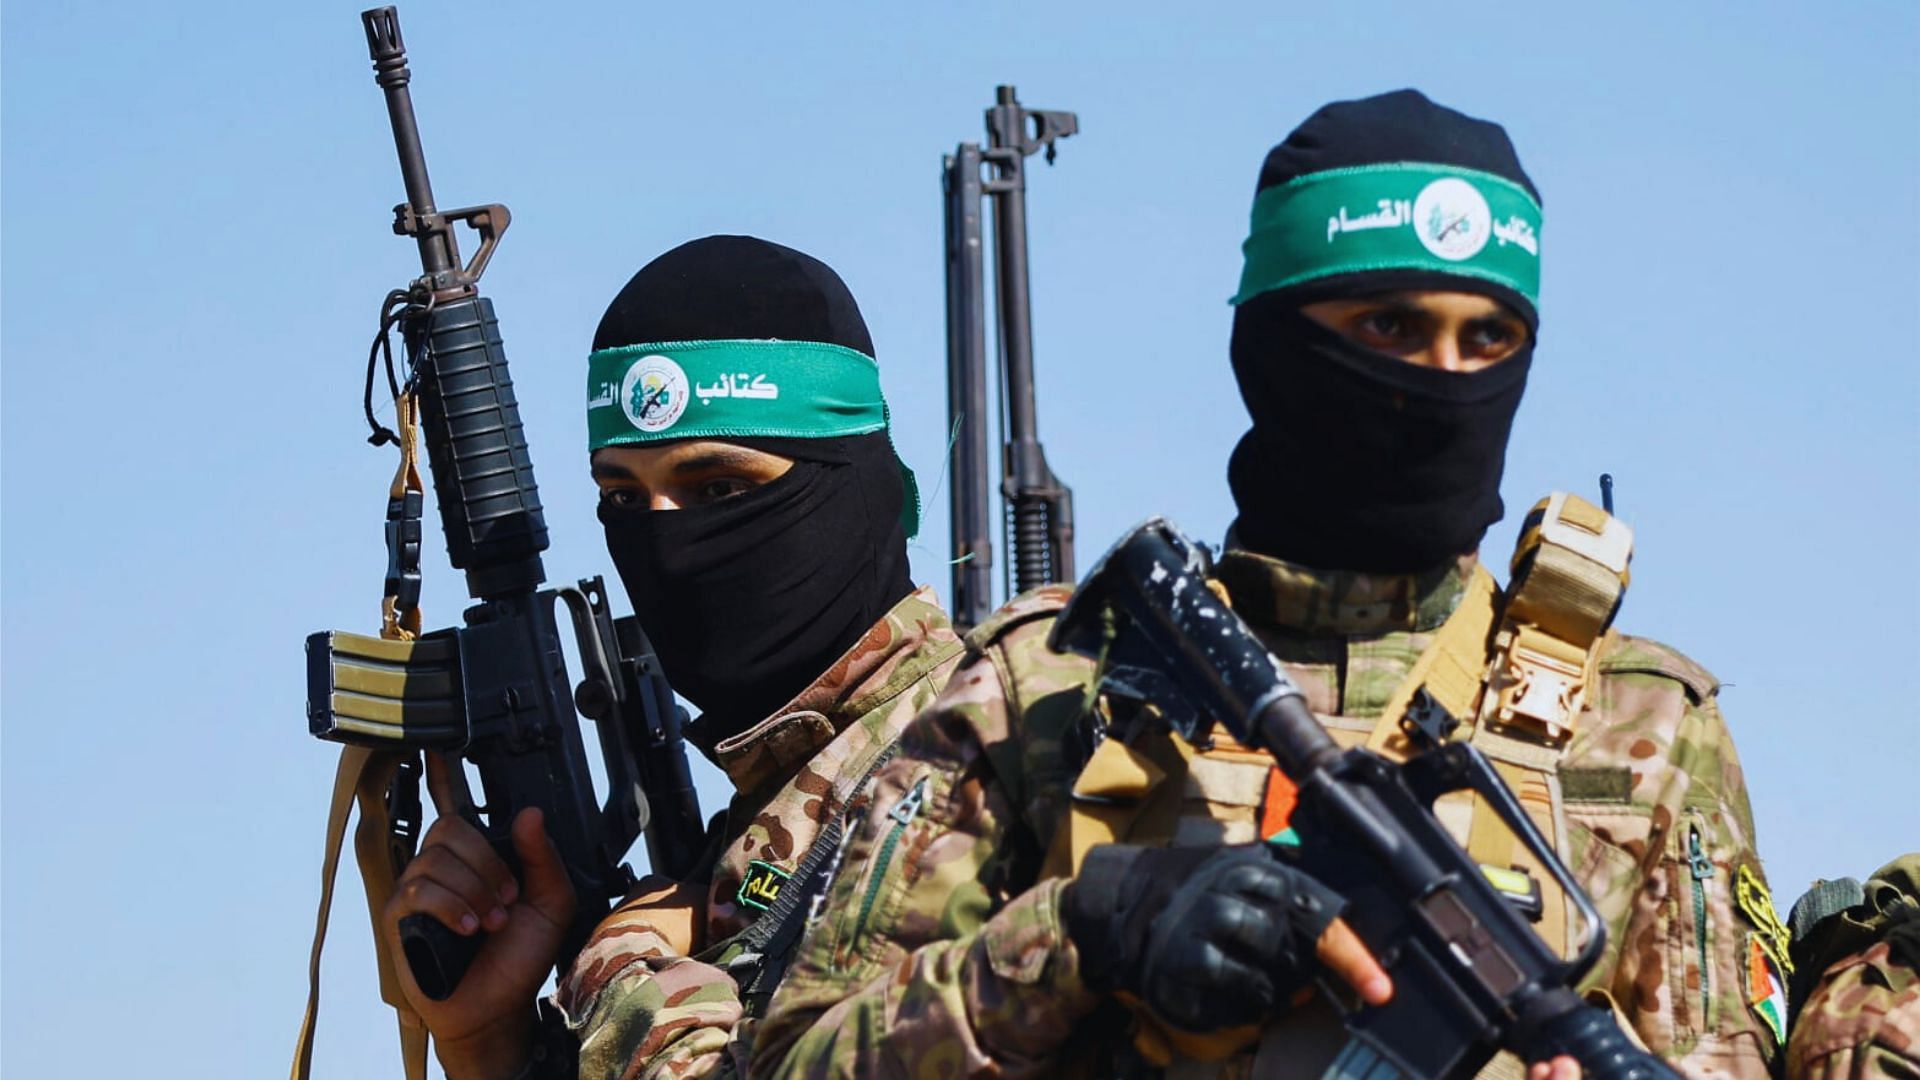 <div class="paragraphs"><p>Since its founding in 1988, Hamas has gained popularity and legitimacy. Its social welfare activities in education, welfare, health services, etc., and its image of being less corrupt provided greater acceptance and legitimacy among the Palestinians.</p></div>